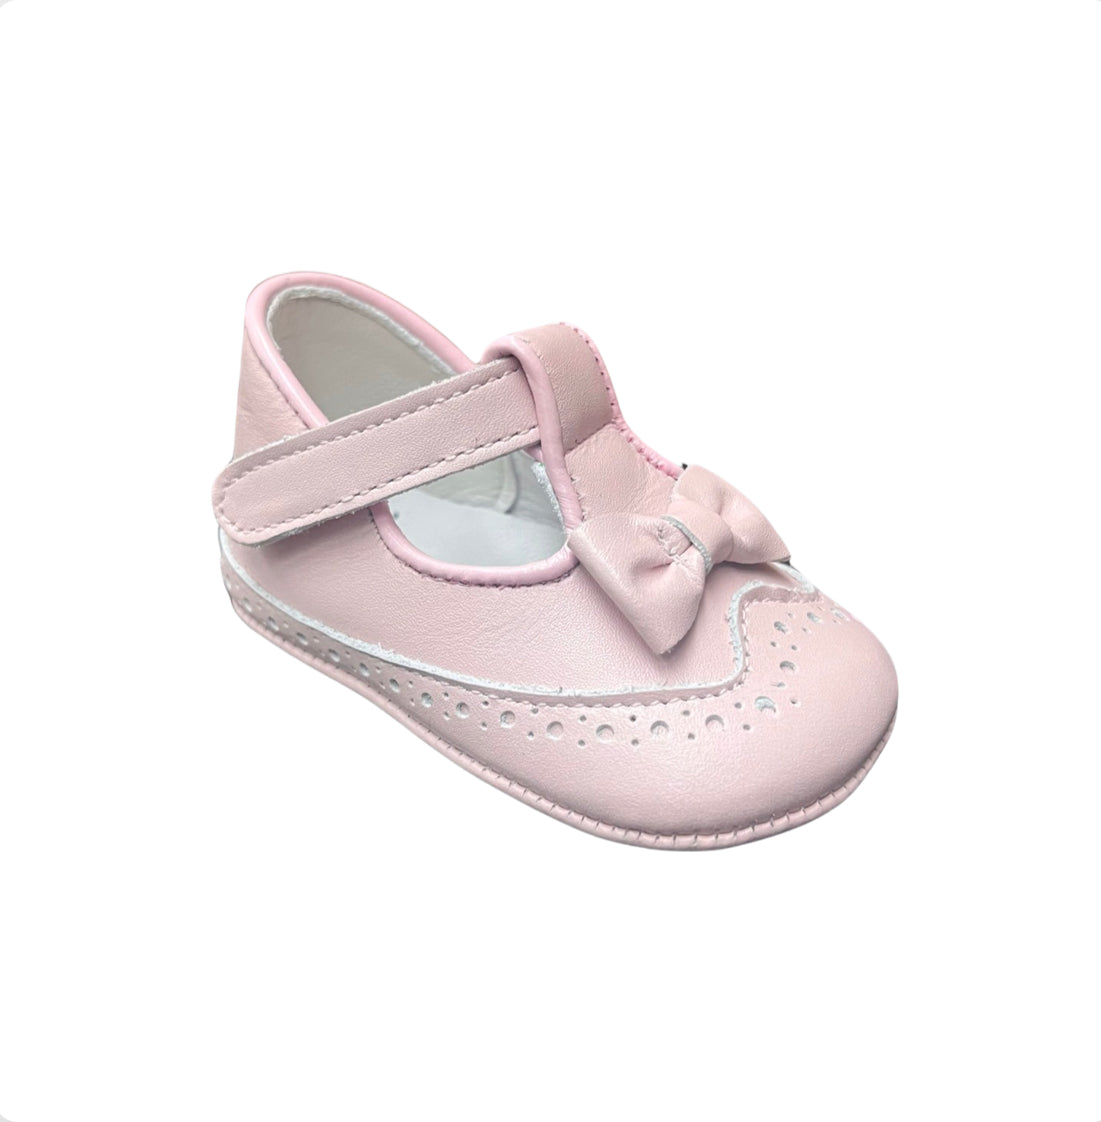 Pretty Originals Baby Girl Pink Leather Pram Shoes